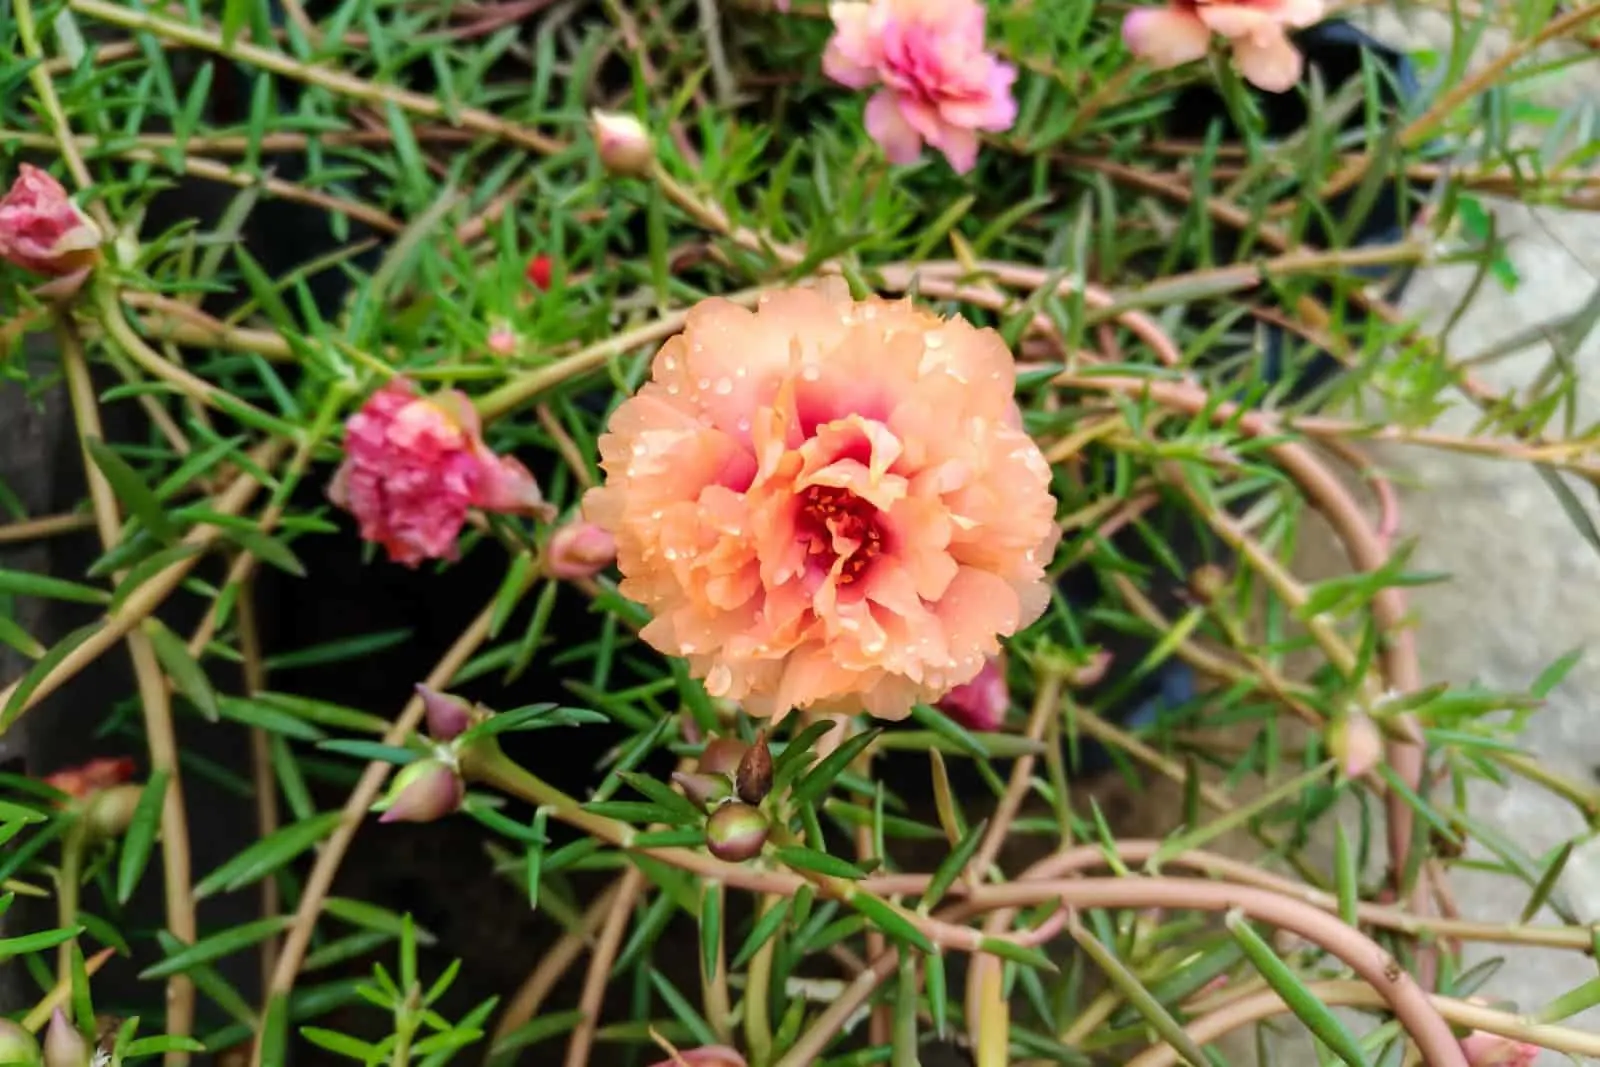 Moss Rose with Water Droplets on the Petals